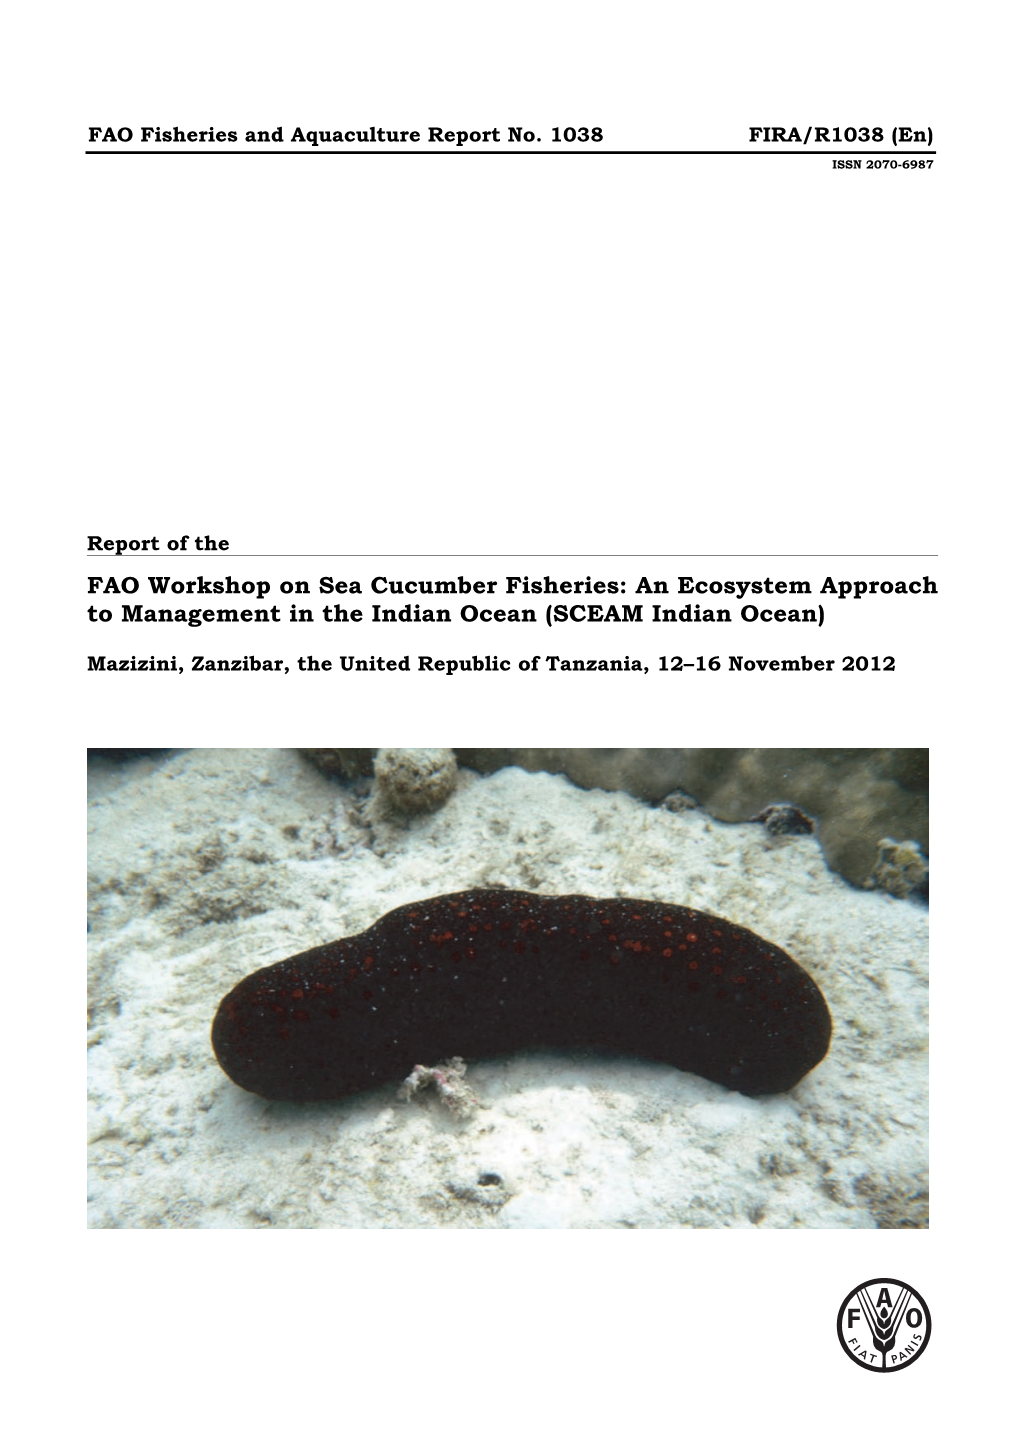 Sea Cucumber Fisheries: an Ecosystem Approach to Management in the Indian Ocean (SCEAM Indian Ocean)